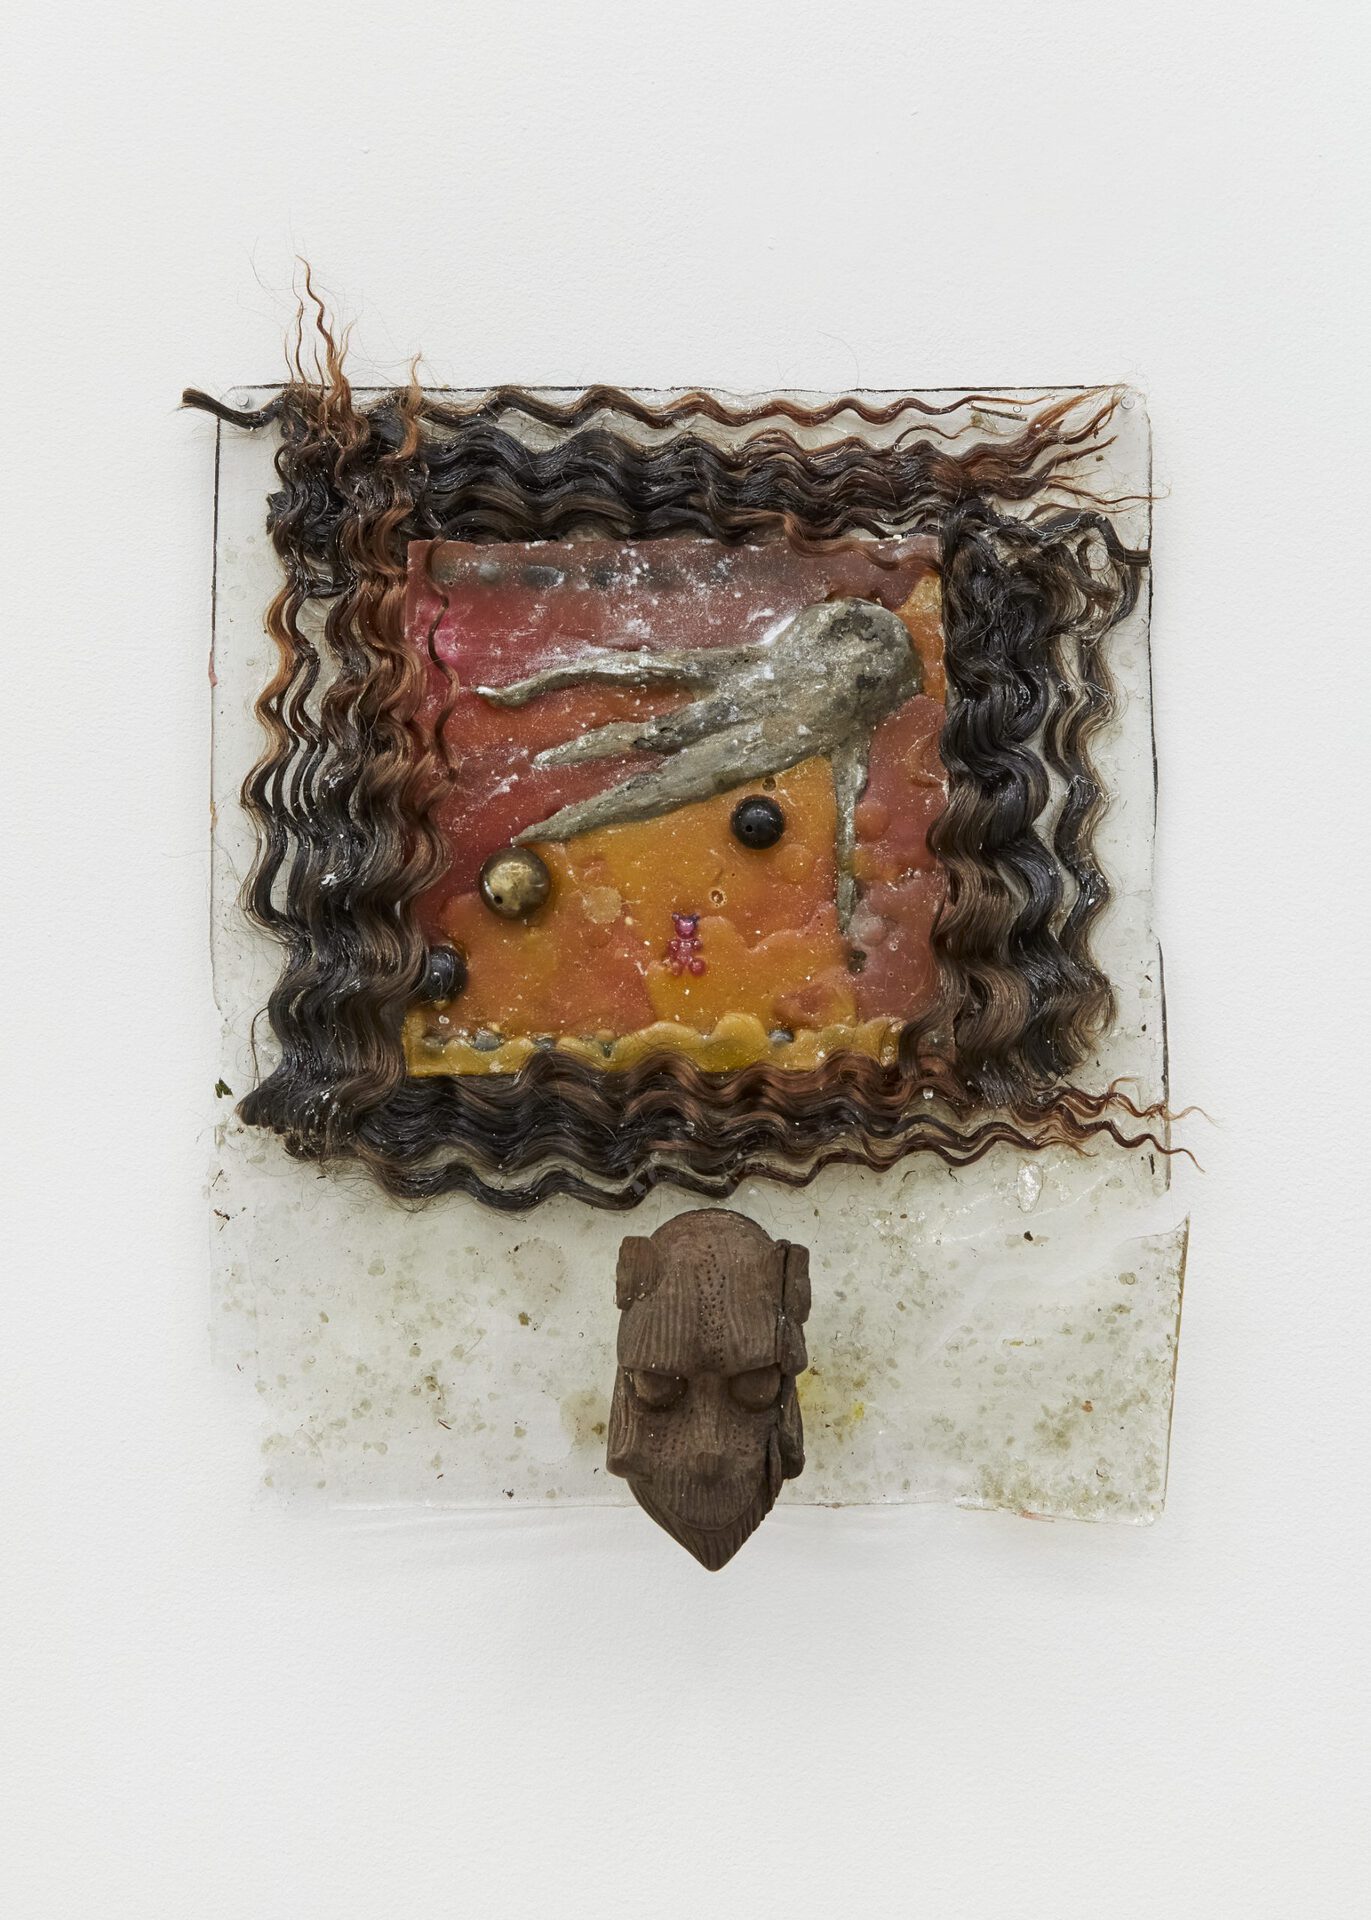 Julie Maurin, Triste dans la fête, 2021. Latex, pearls, synthetic hairs, wooden found object, wax, epoxy resin, 33 x 27 x 7 cm